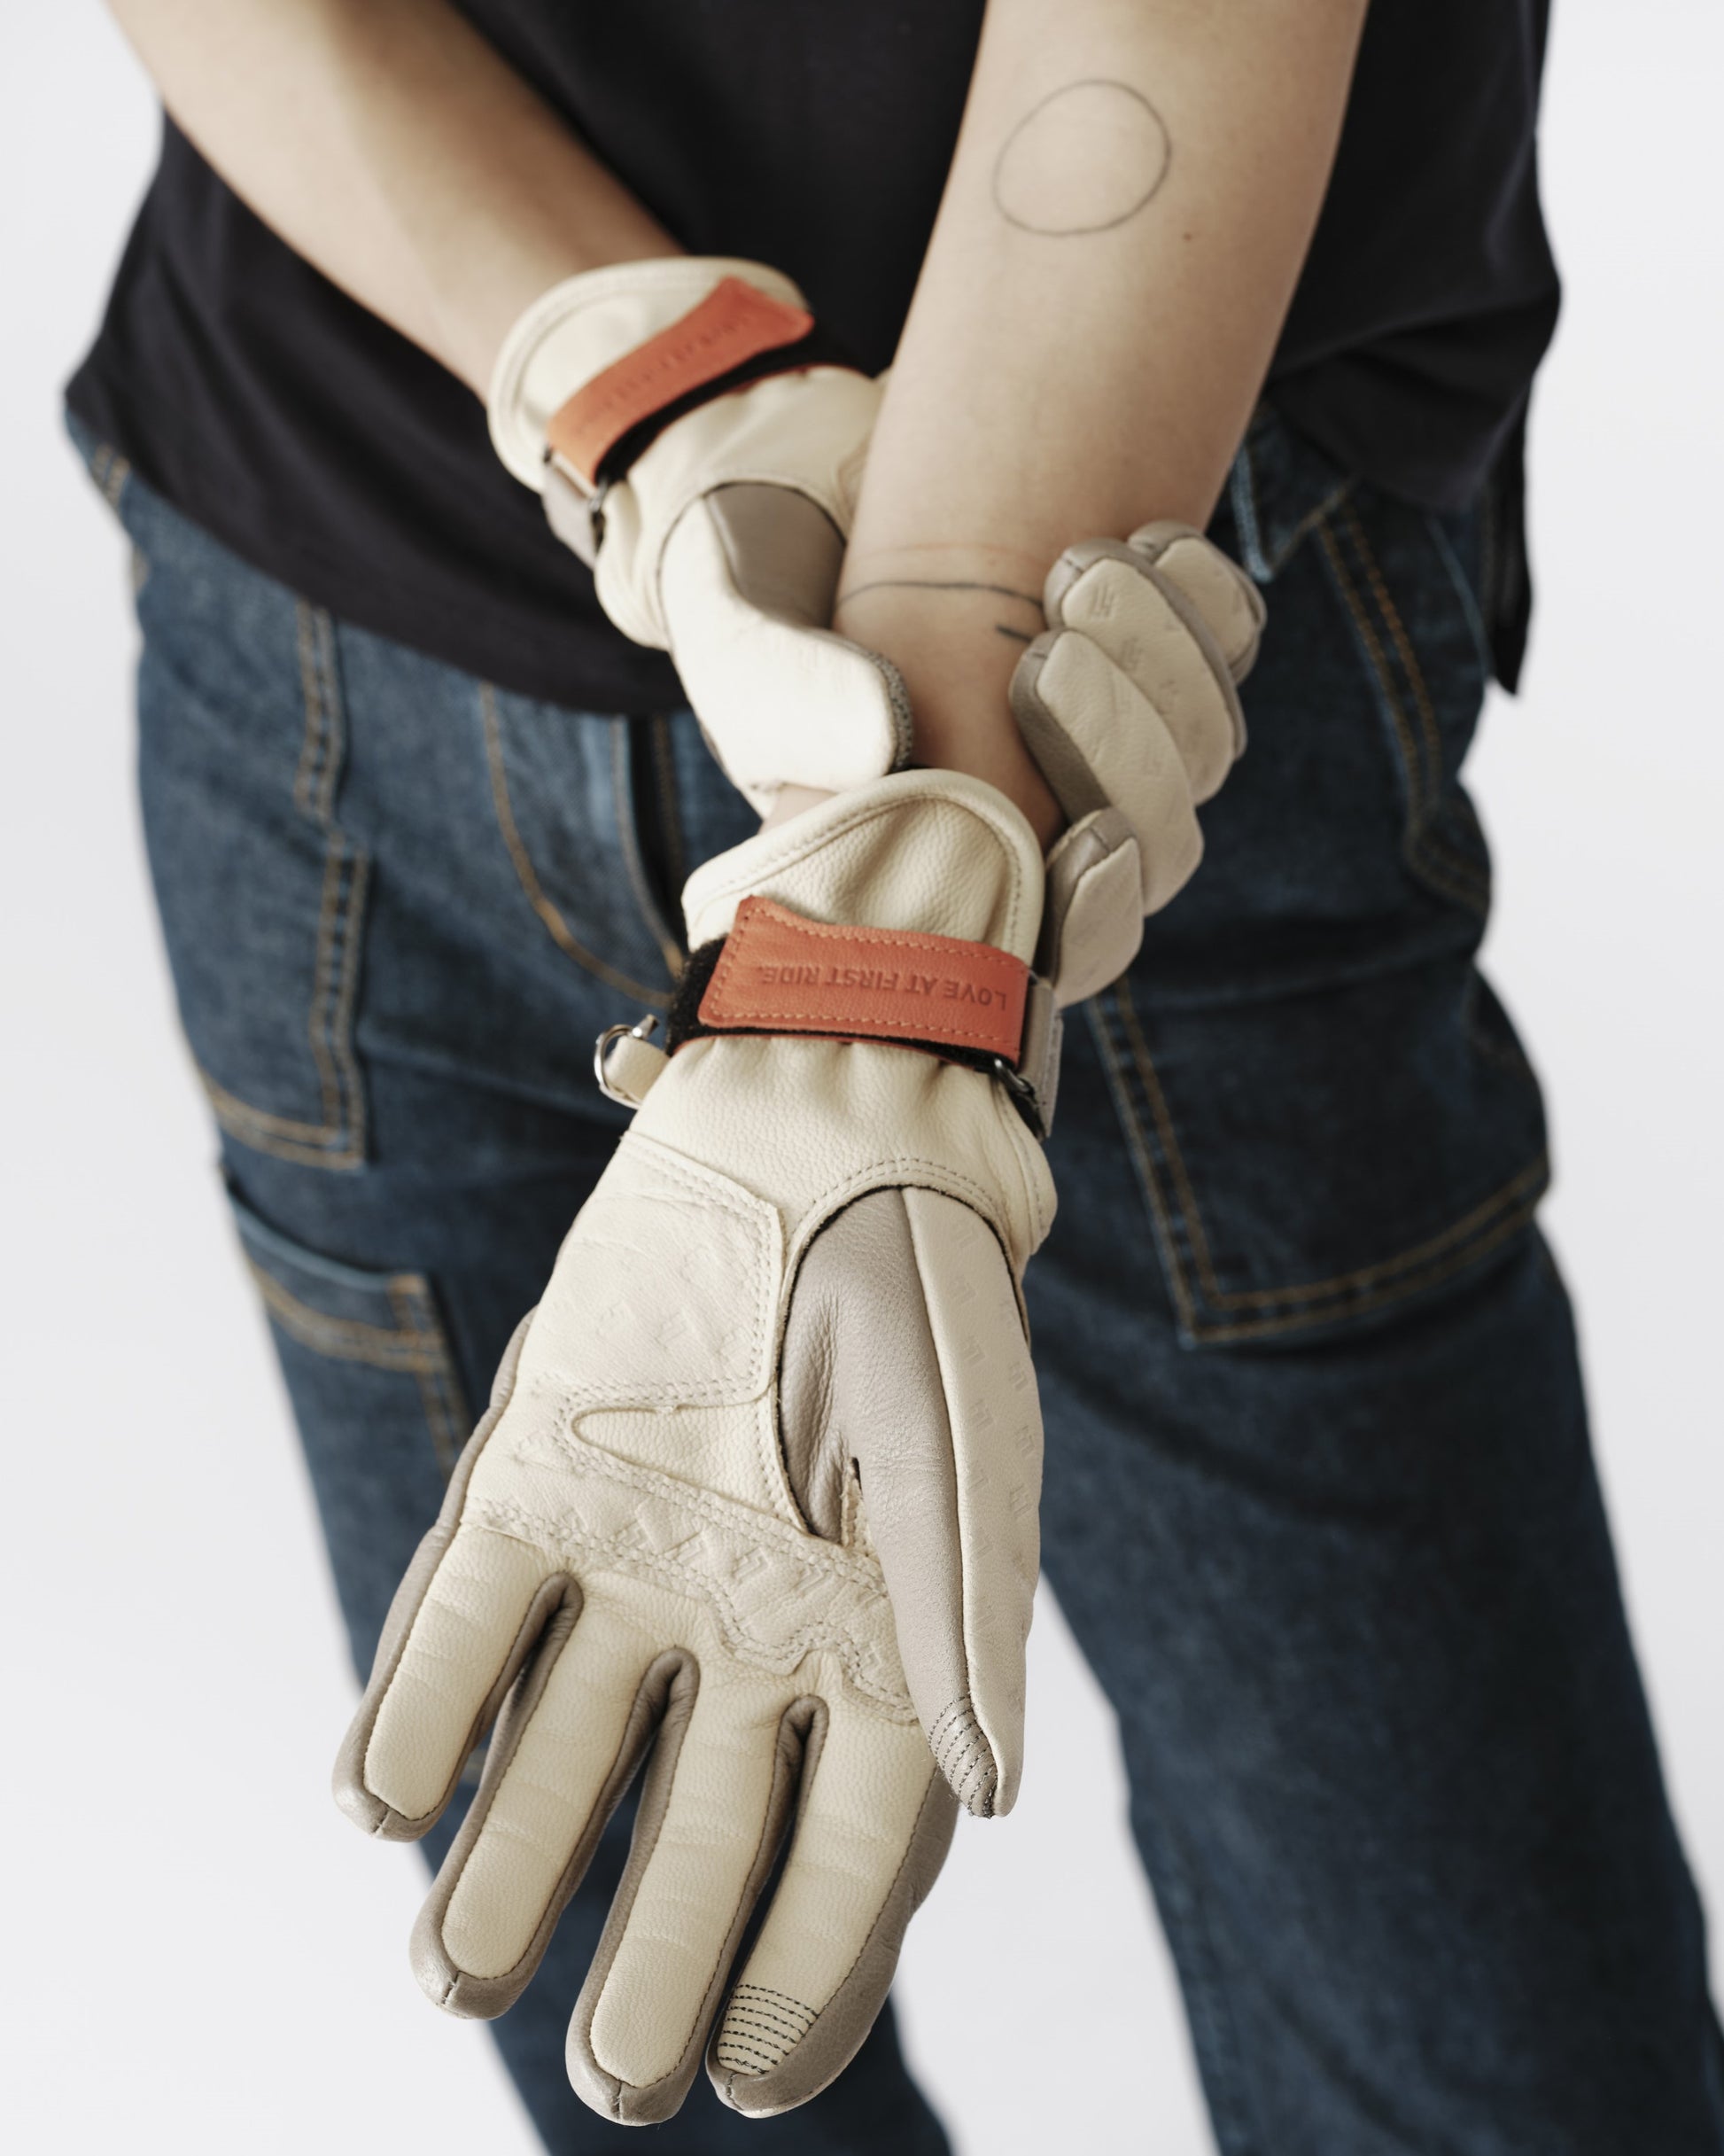 Certified protective gloves - Beige